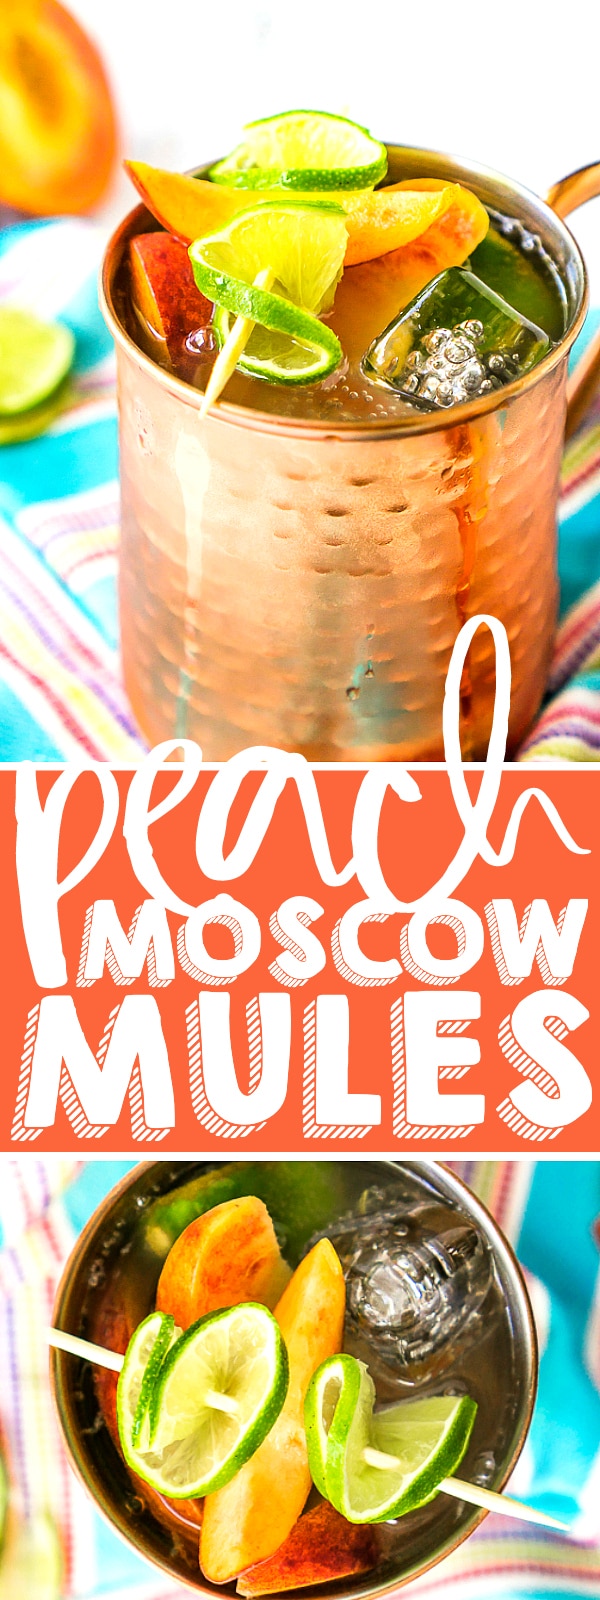 Peach Moscow Mules are a true summer cocktail winner! Three ingredients will help you make the perfect peach cocktail that is both sweet and a little bit spicy from the ginger beer! | THE LOVE NERDS #cocktailrecipe #summerdrinks #moscowmulerecipe #peachrecipe #peachcocktail